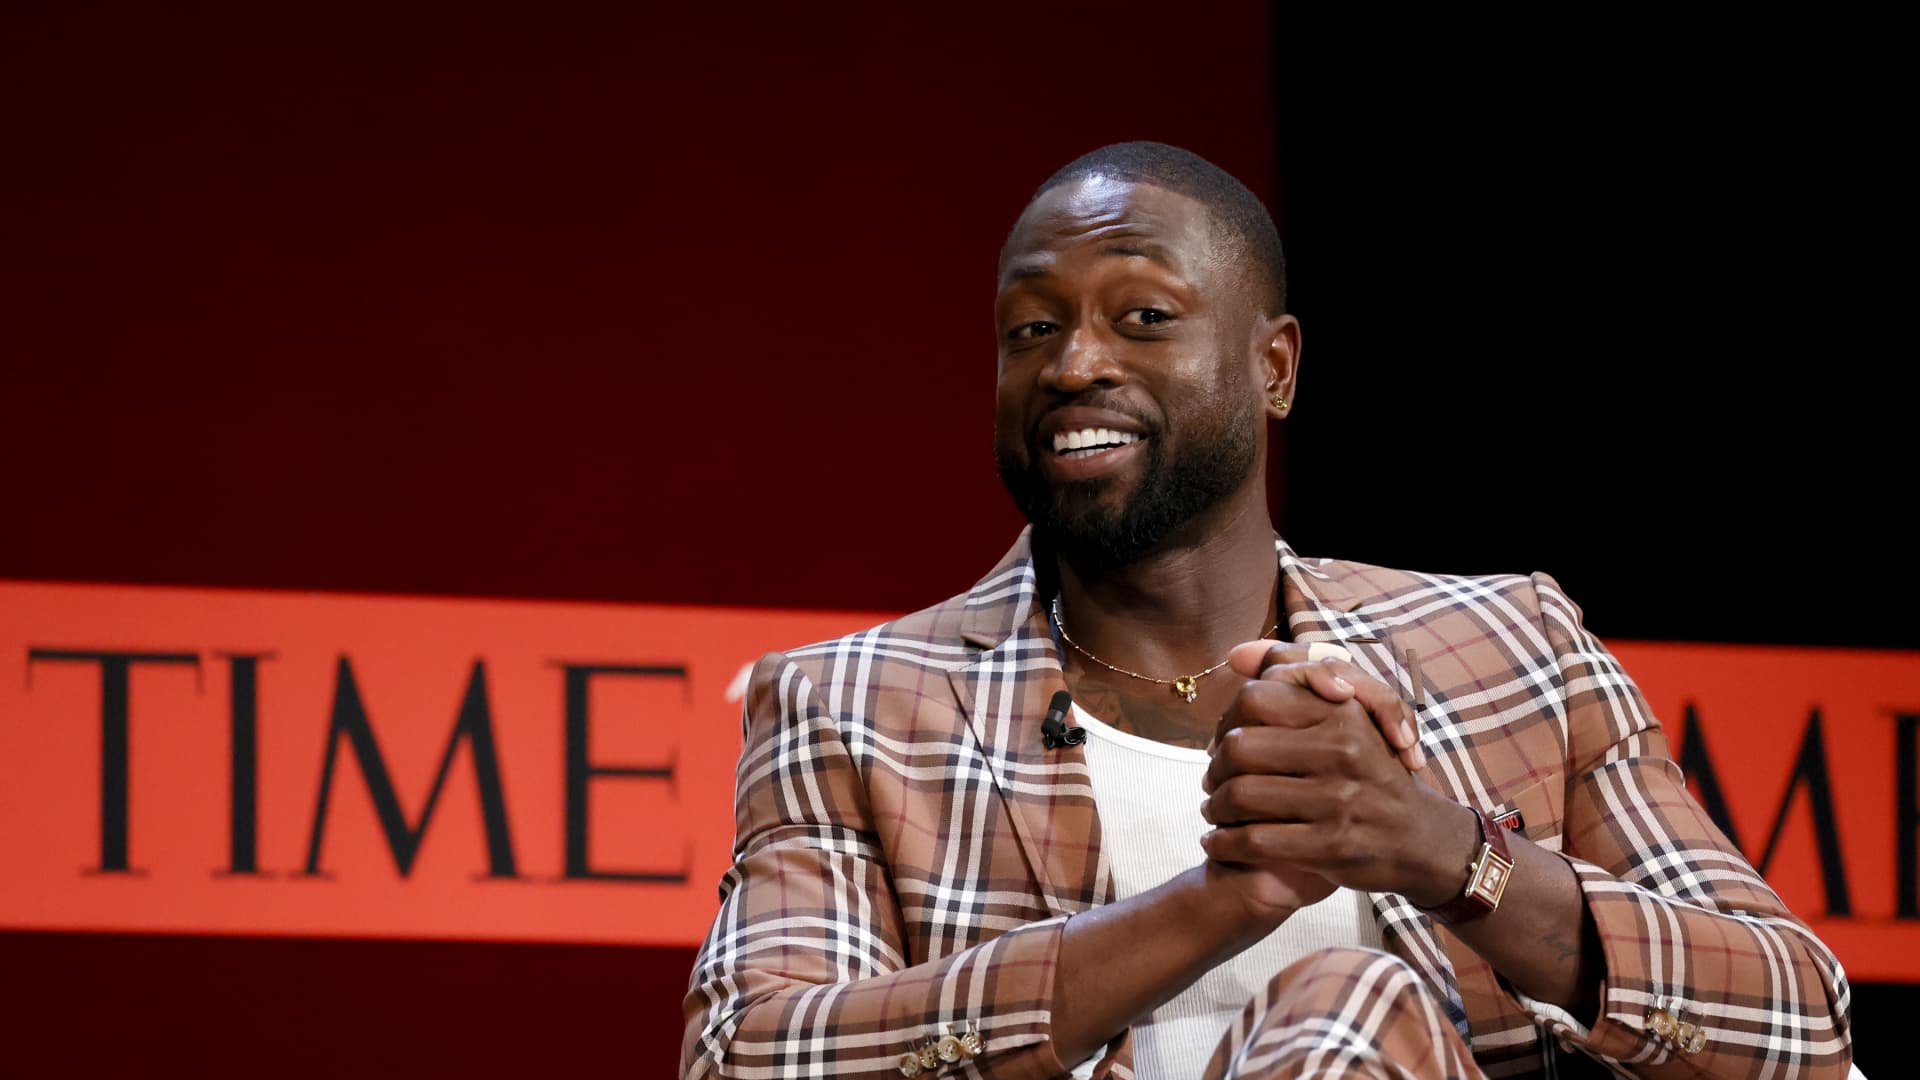 Hall of Famer Dwyane Wade wants to 'maximize each day' of his post-NBA career